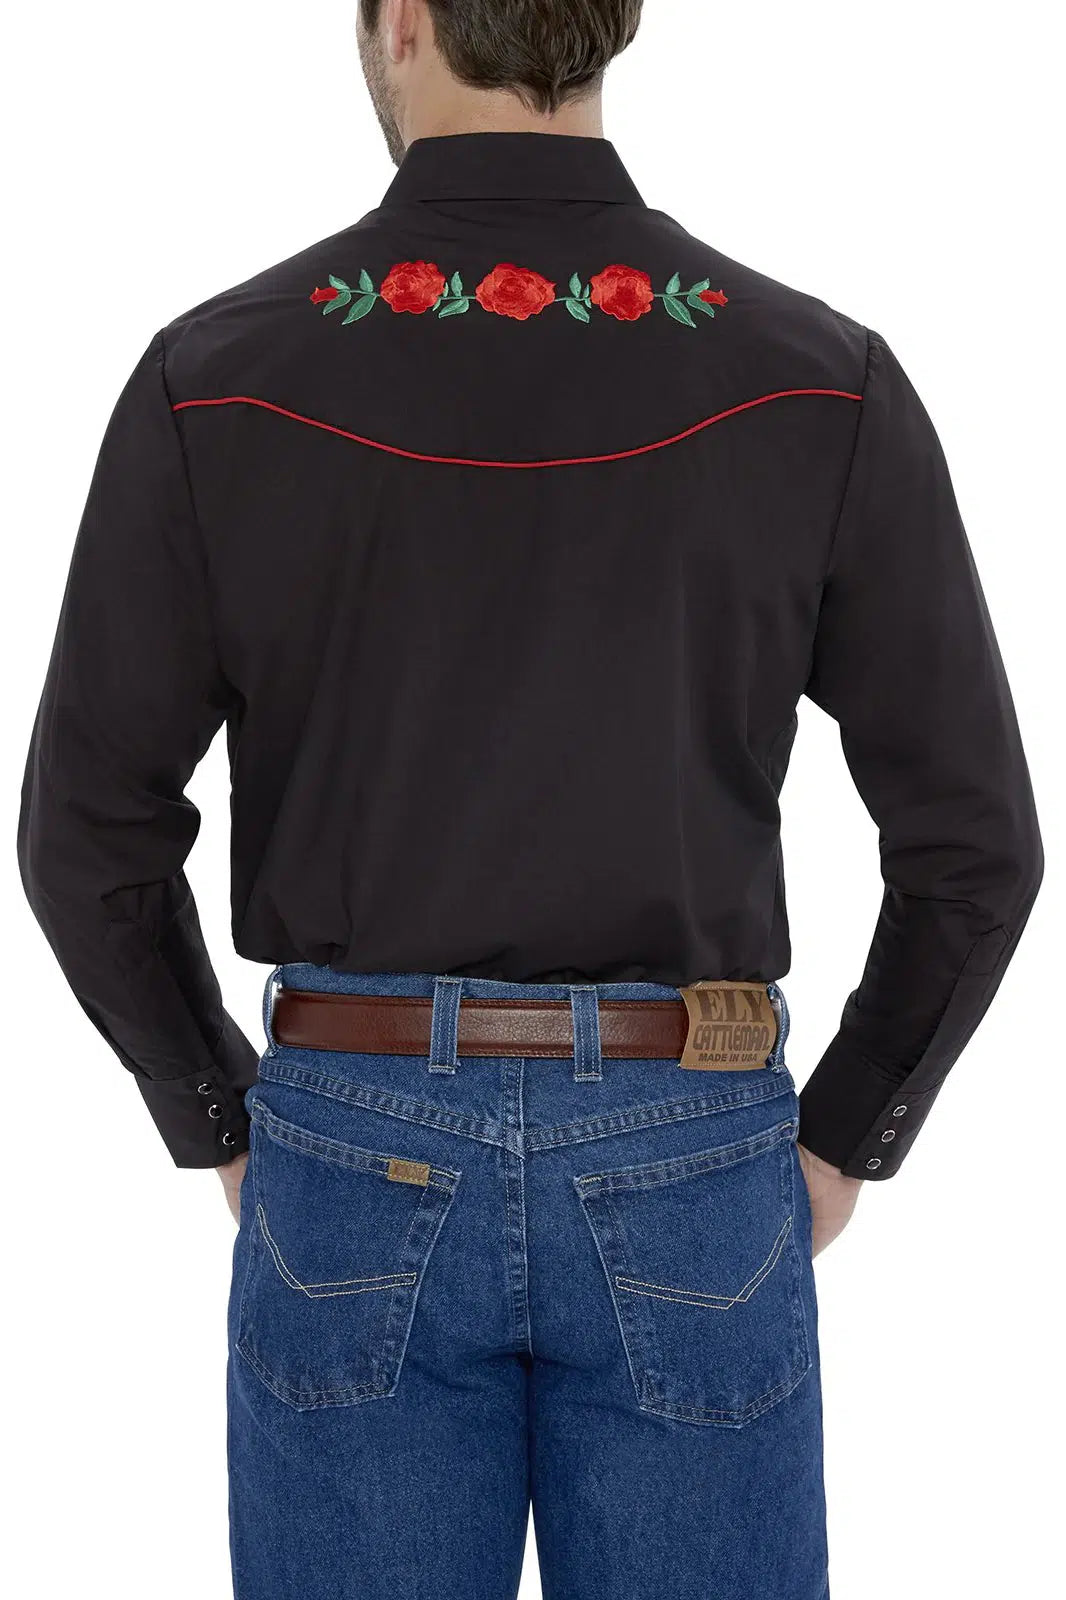 The back of a man wearing an ELY mens embroidered rose western shirt by Ely brand shirts.